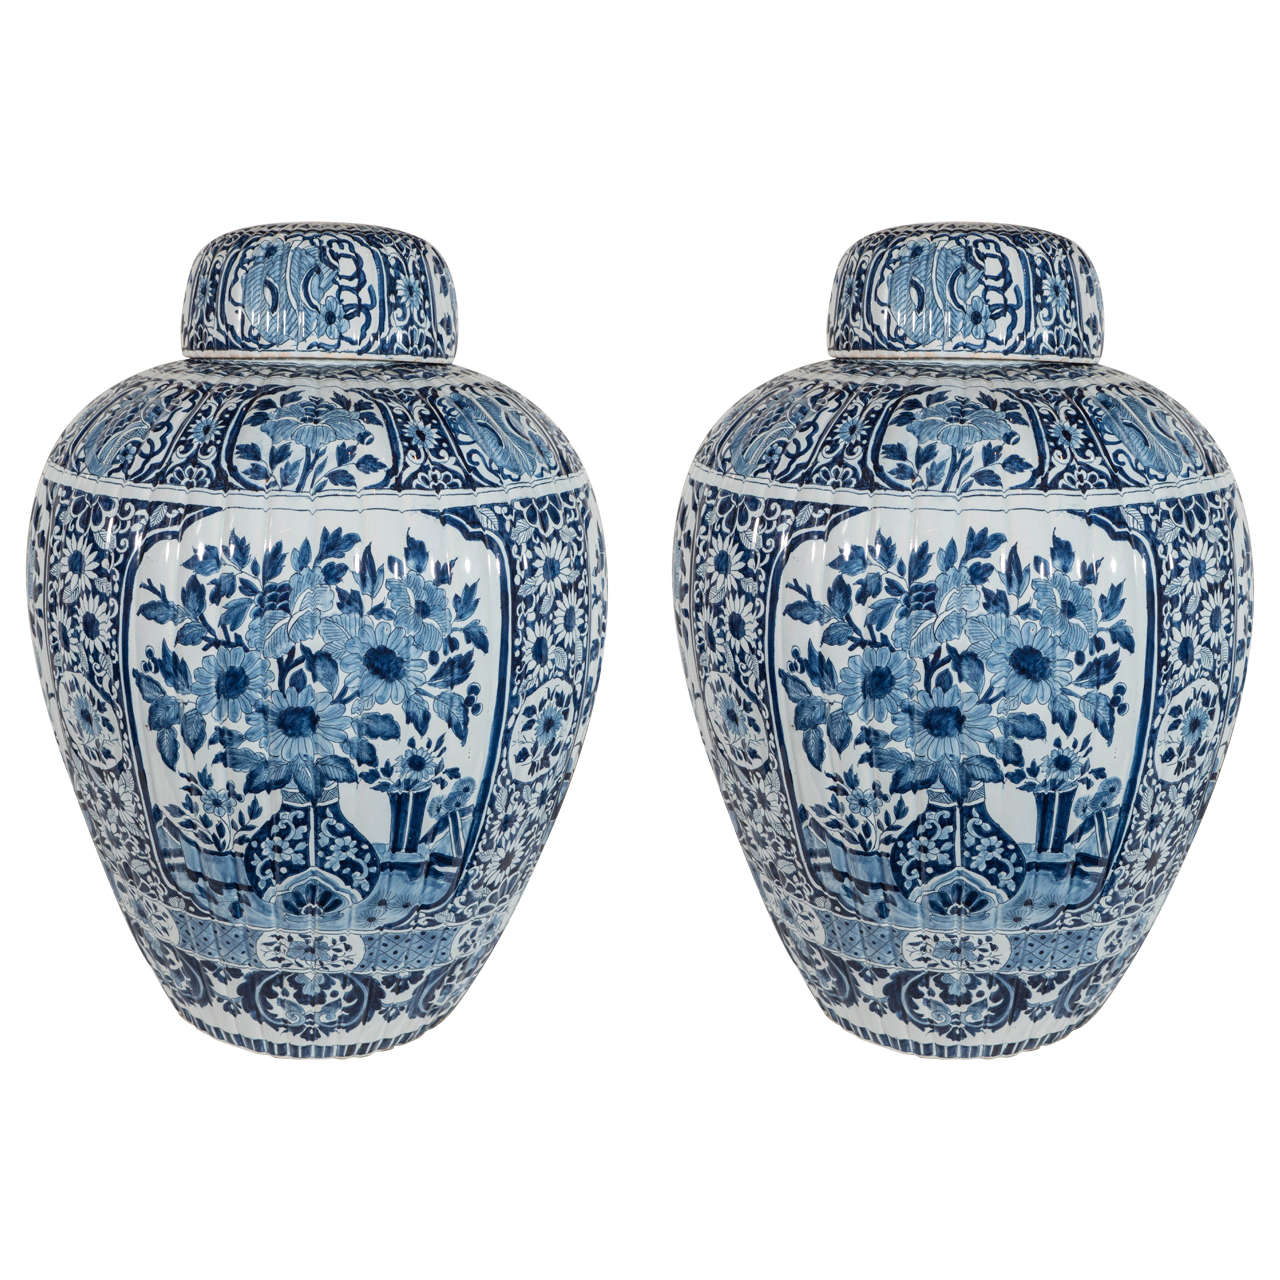 Pair of Blue and White Dutch Delft Ginger Jars